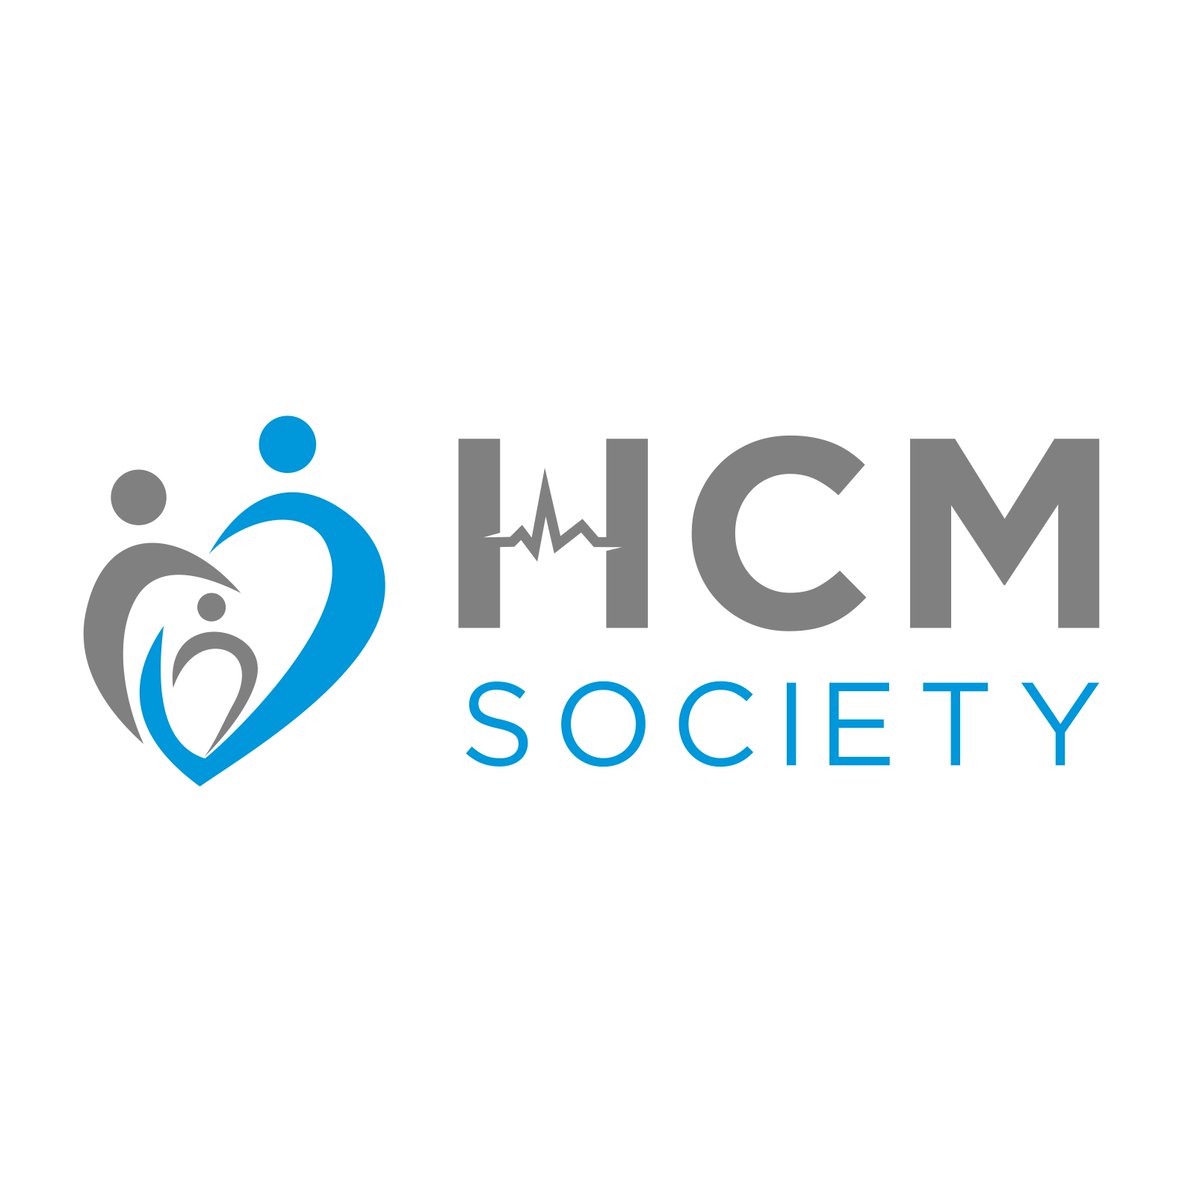 Announcing the launch of the Hypertrophic Cardiomyopathy Medical Society, on a mission to improve diagnosis & treatment of those w/ HCM through clinical excellence, research, & education. Learn more & join at hcmsociety.org  #FightHeartDisease #cardiology #cardiotwitter